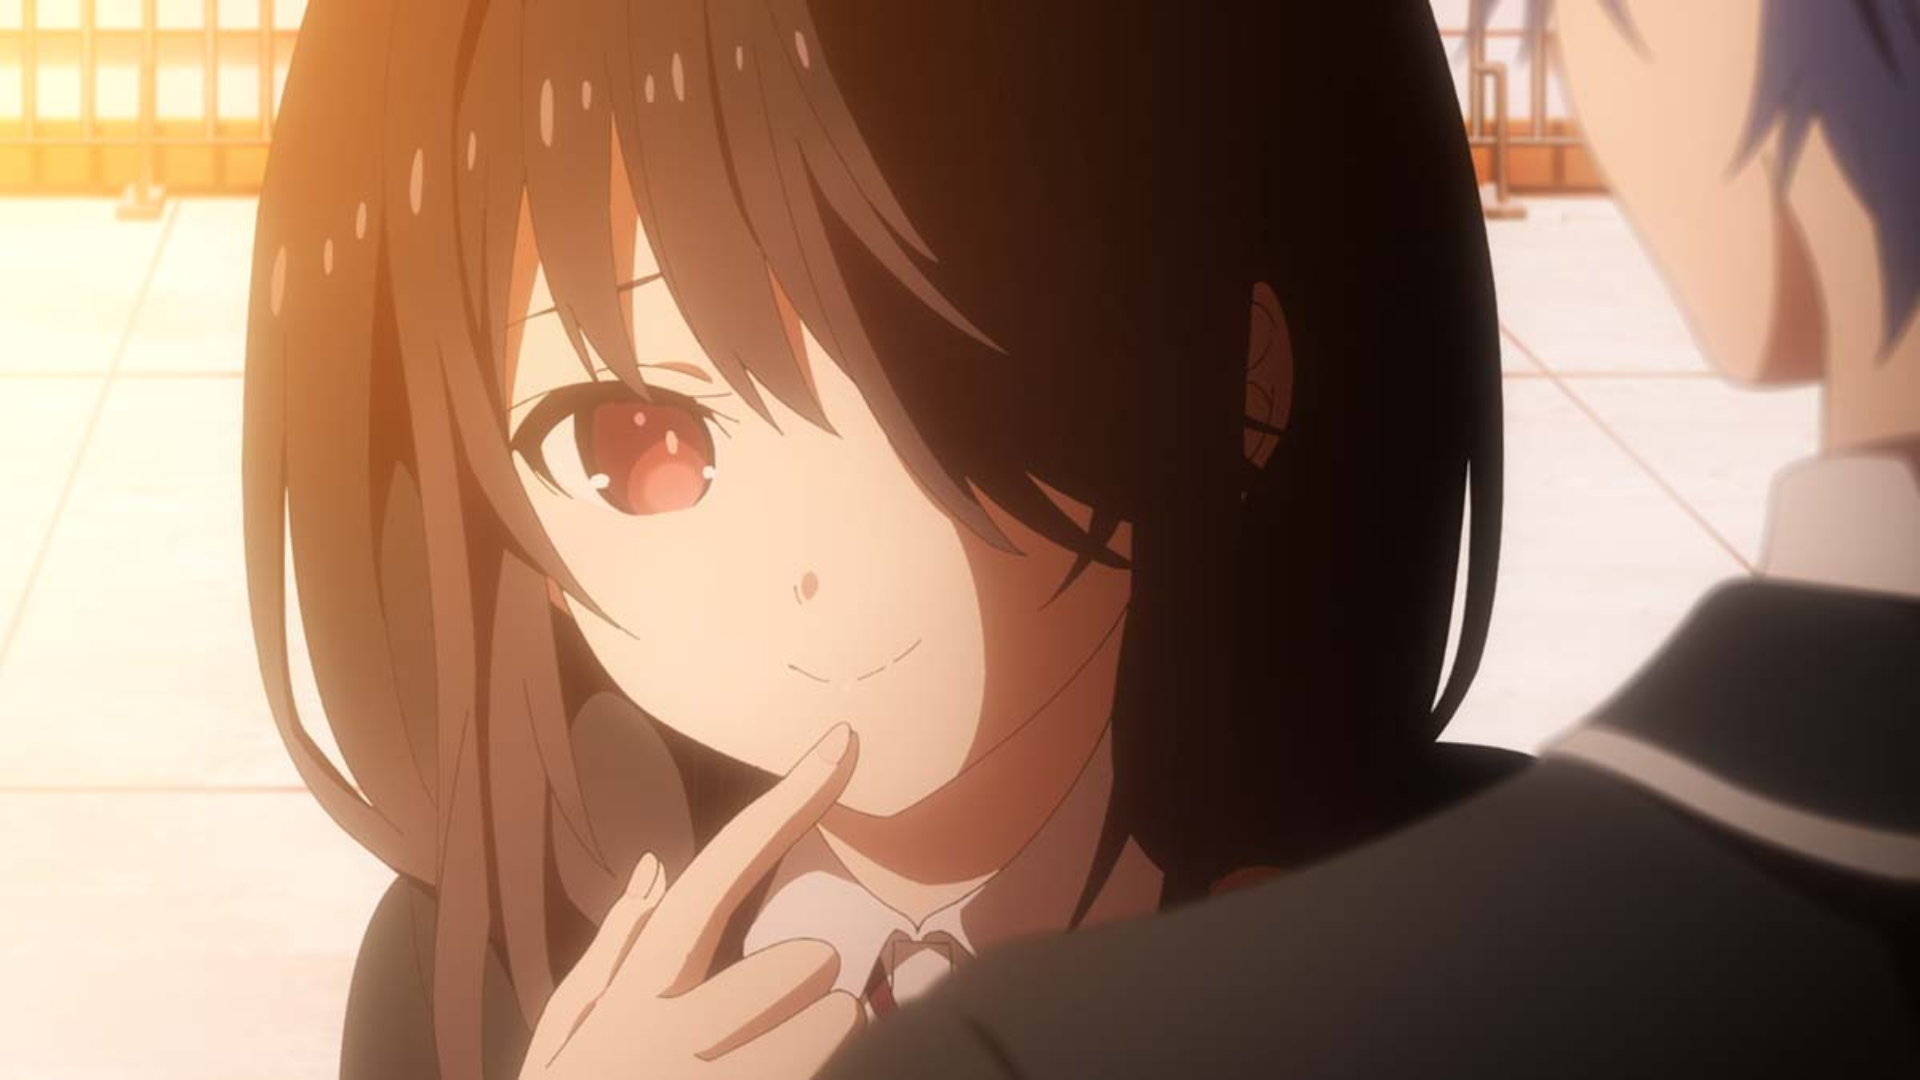 Date a Live IV Episode 9 Preview Images Features Kurumi Refrain Arc